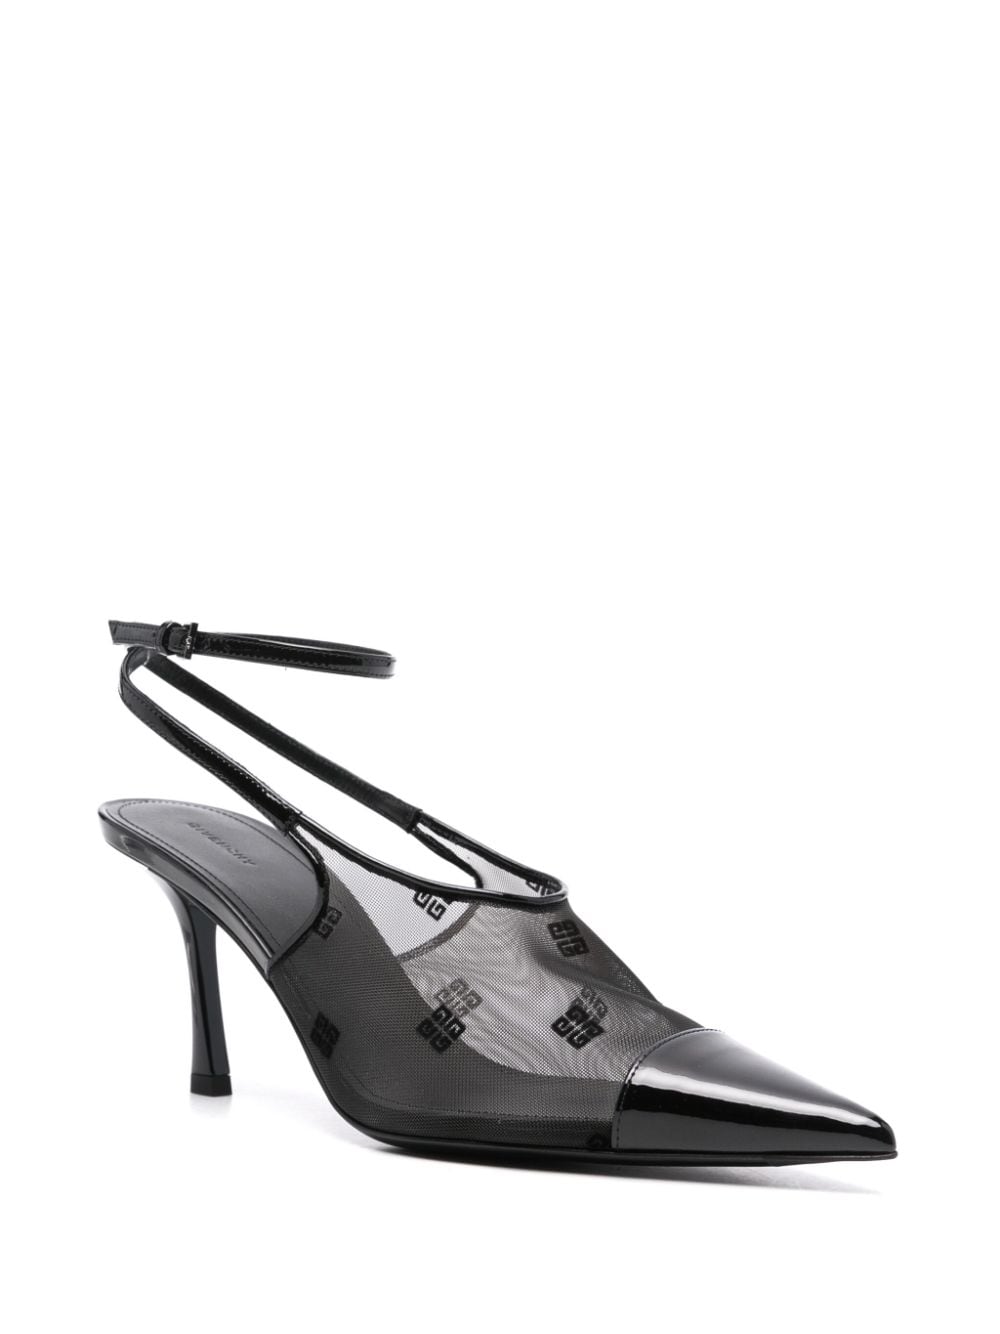 Shop Givenchy Show 90mm Pumps In Black